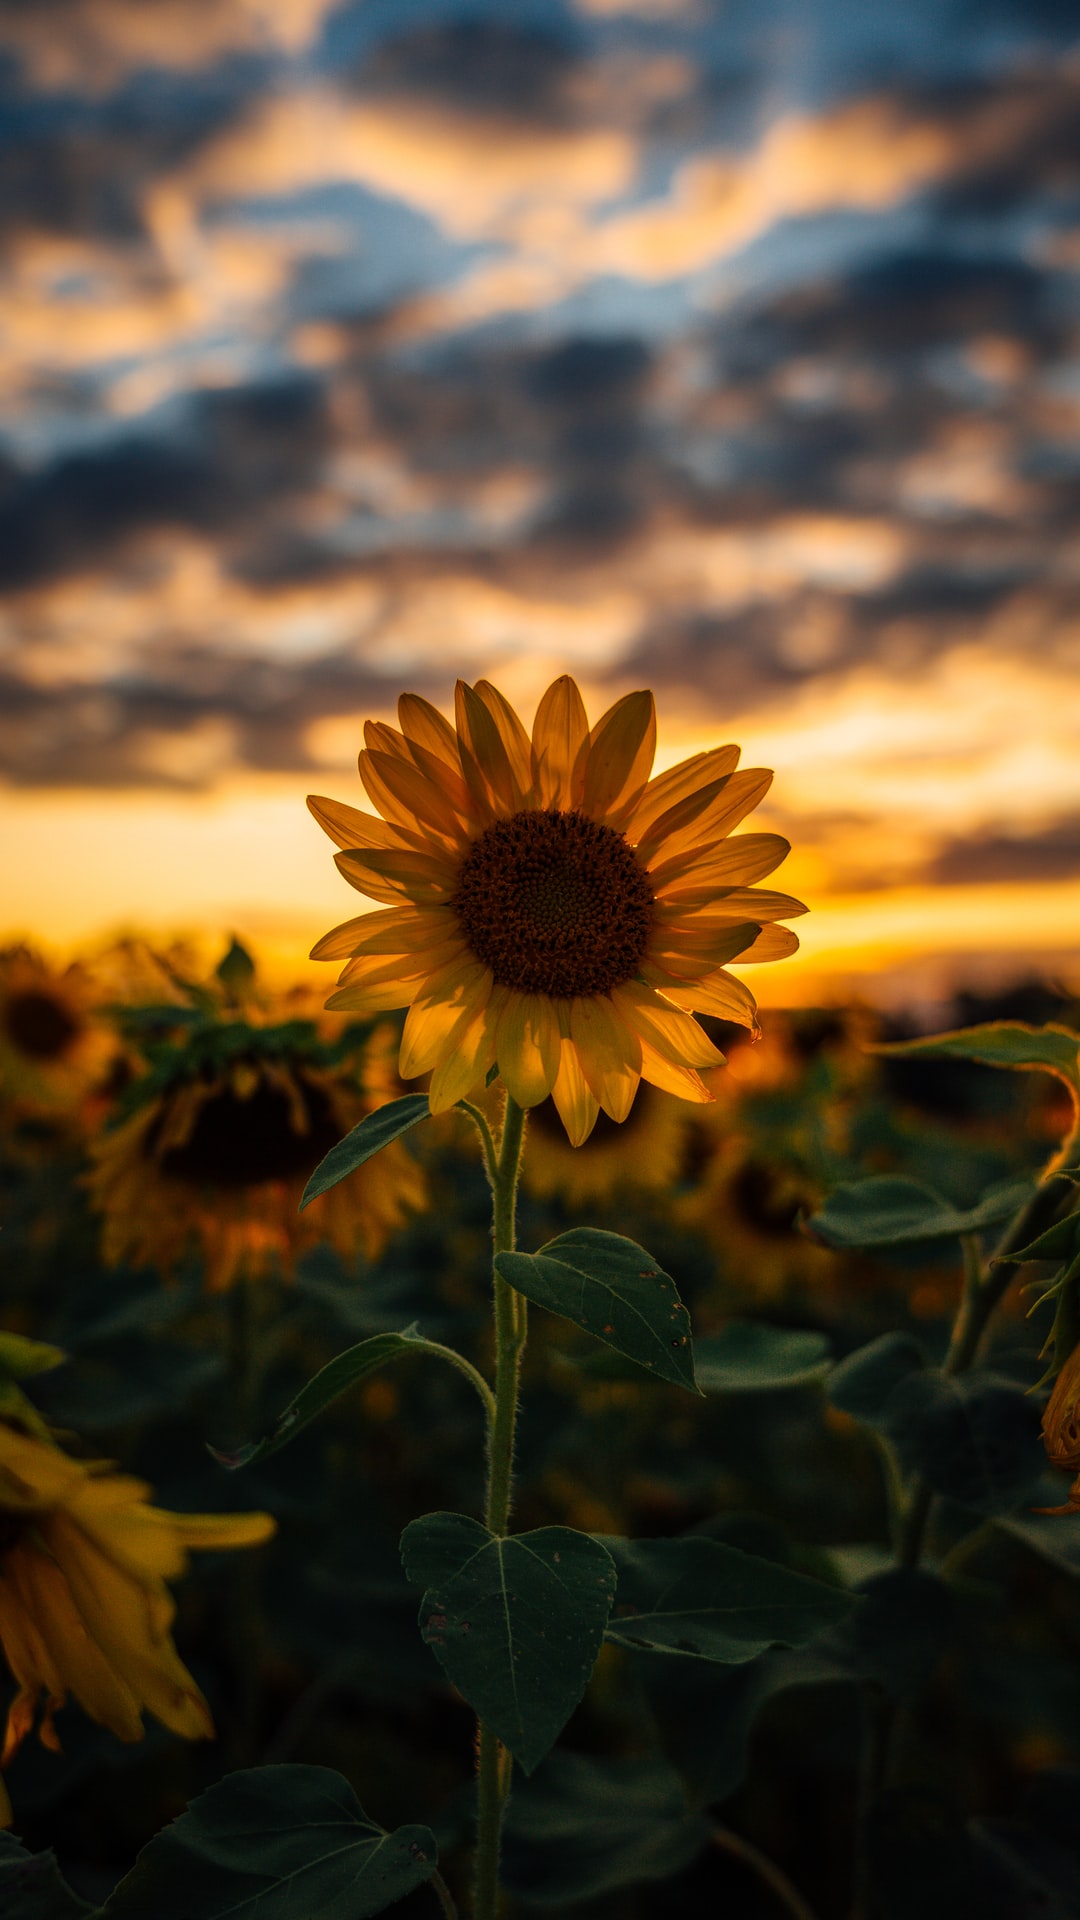 100 Sunflower wallpapers HD  Download Free backgrounds